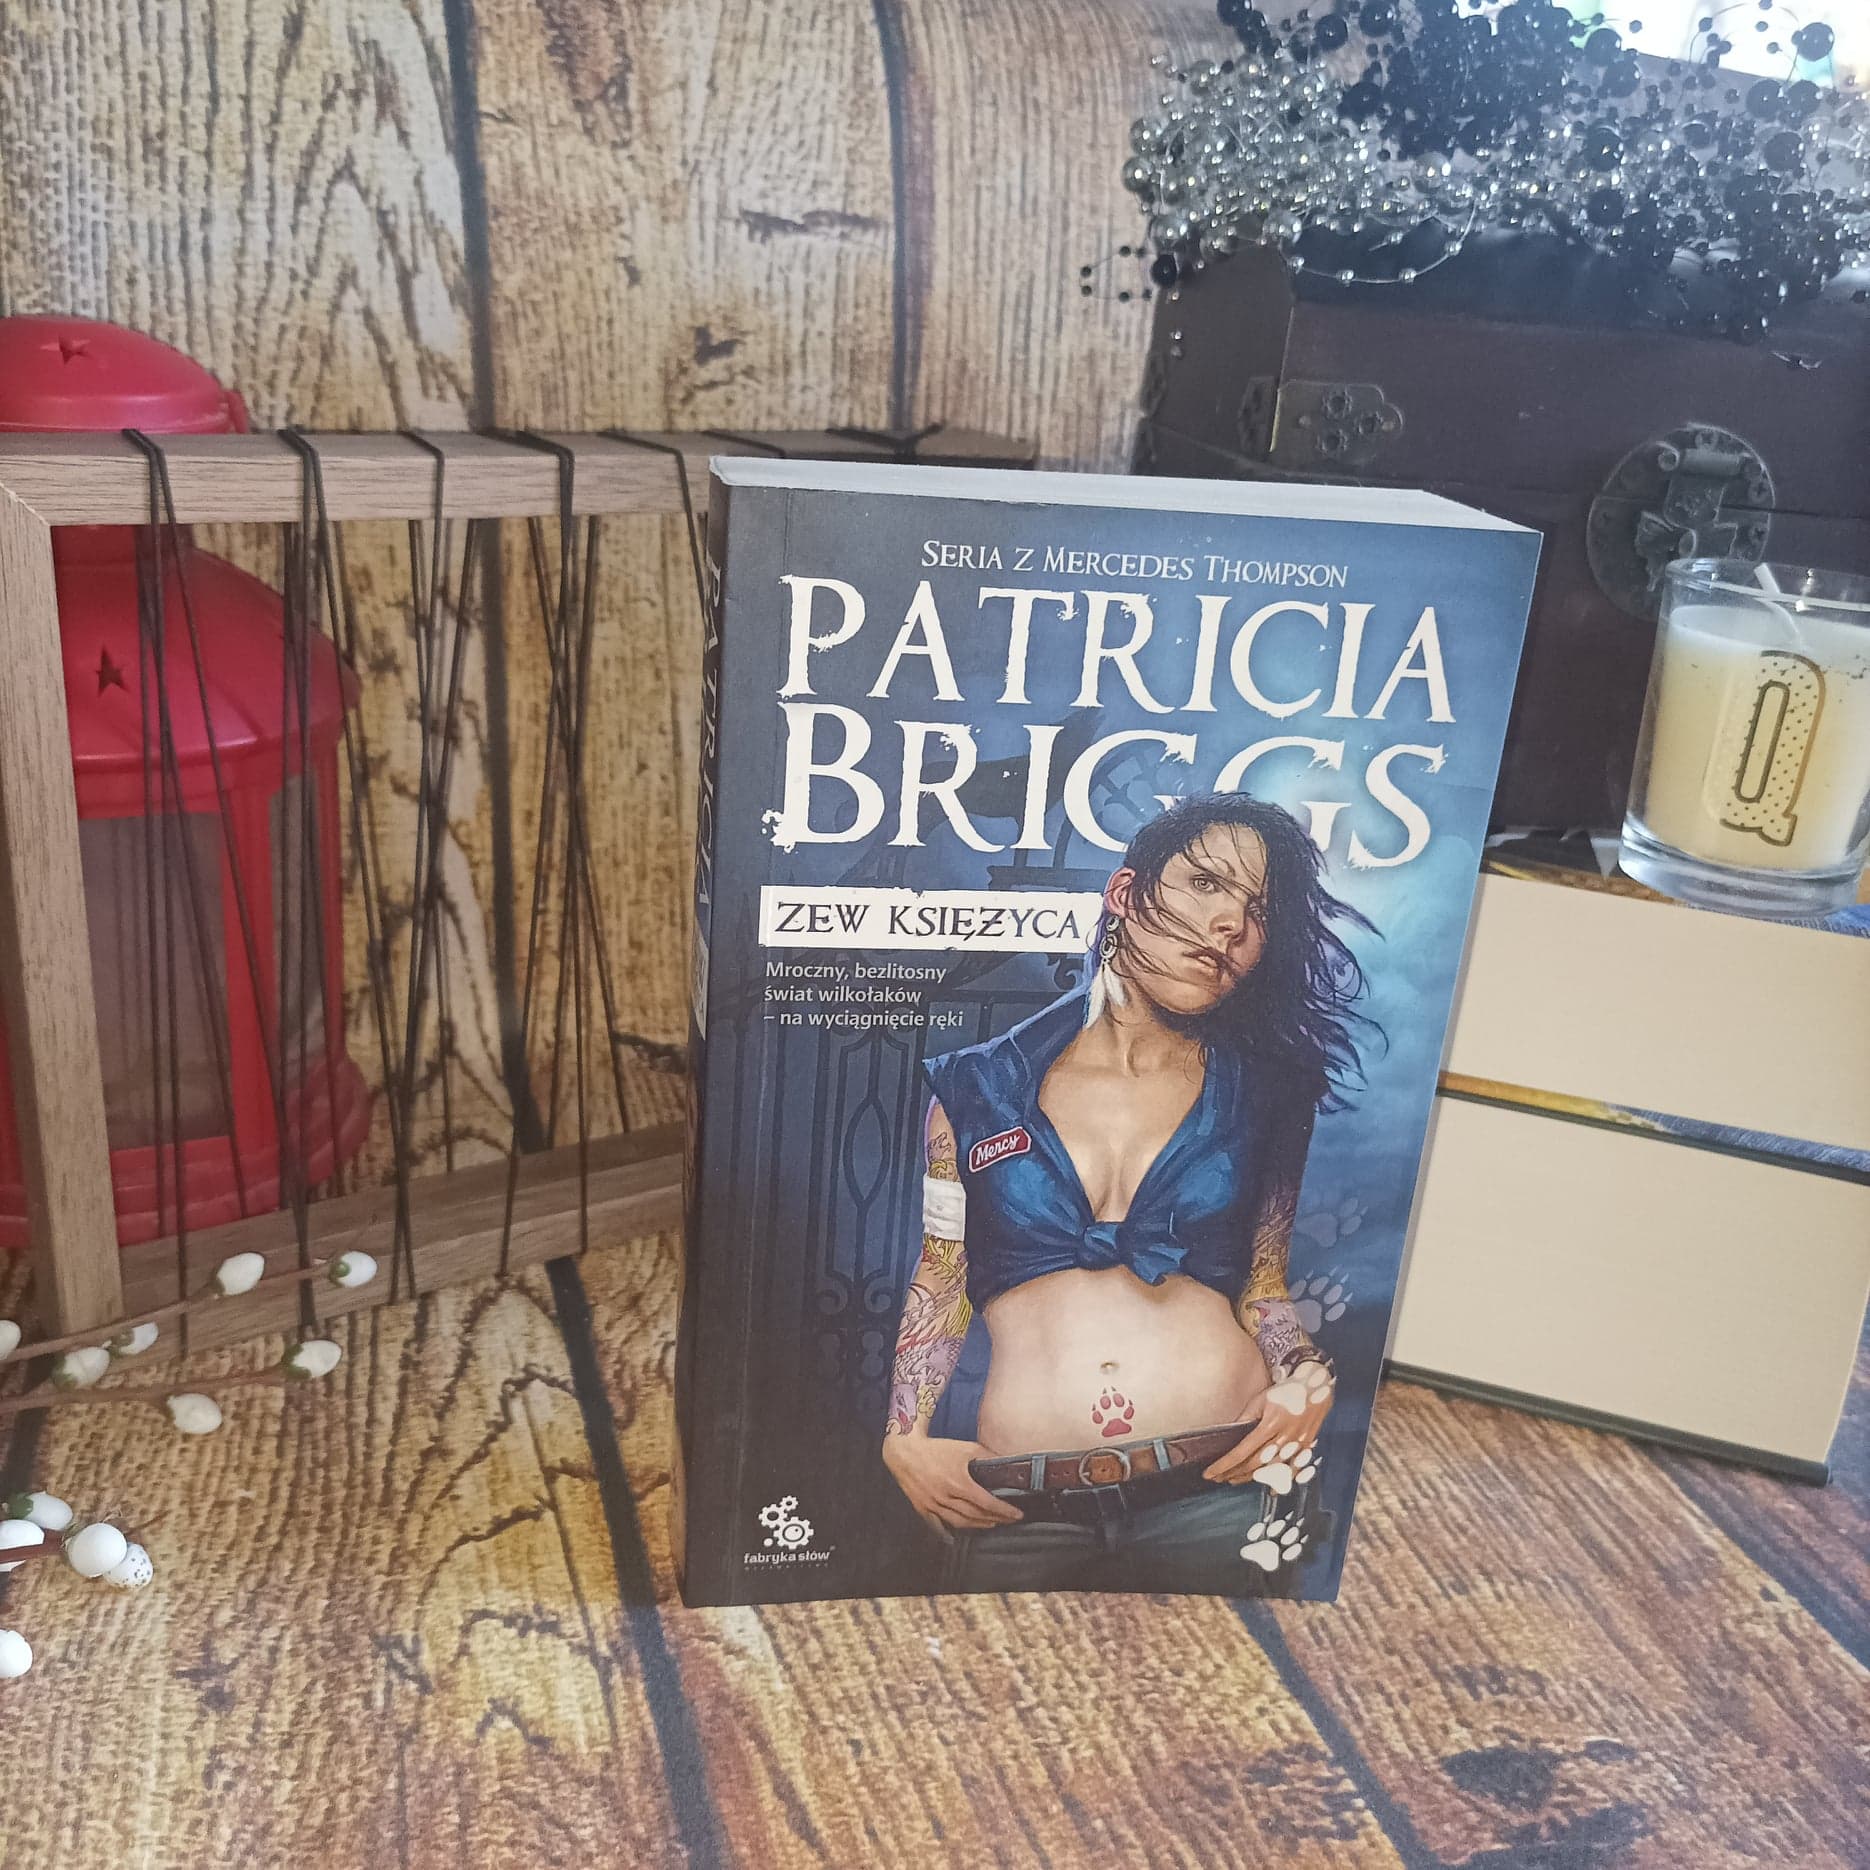 You are currently viewing Zew księżyca Patricia Briggs